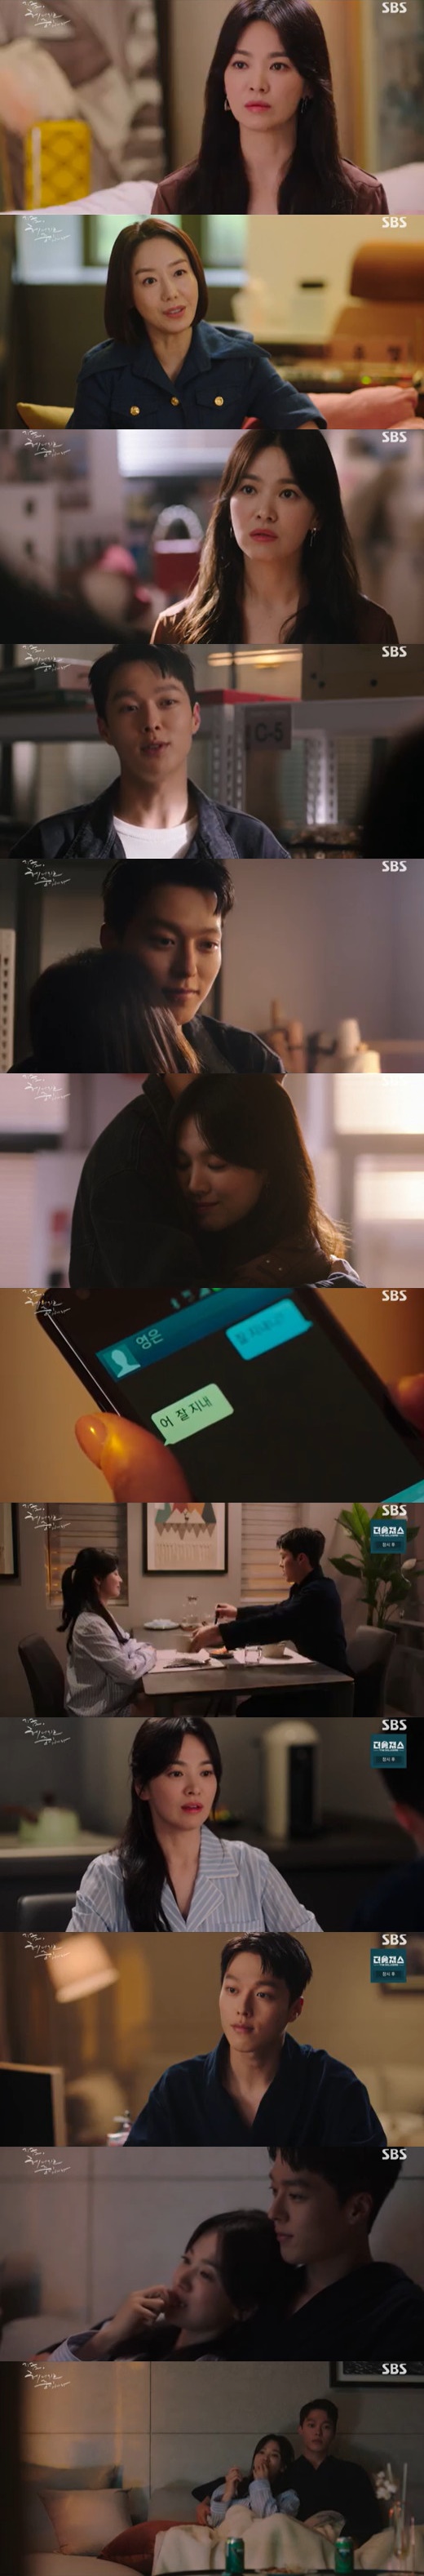 In Now, Im Breaking Up (hereinafter referred to as Jihejung), Song Hye-kyo completely overcome Shin Dong-wooks diving breakup wounds and began a new love with Jang Ki-yong.In the 7th episode of SBSs Jihejung, which was broadcast on the afternoon of the 3rd, Ha Young-eun (Song Hye-kyo), who washed the wounds about his dead ex-boyfriend, Yun Soo-wan, and confirmed his firm love with Yun Jae-guk, was portrayed.Ha Young-eun was in a mixed situation after hearing that Yoon Soo-wan was dead and getting in touch with his cell phone number. Yoon Soo-wan is also Yun Jae-kooks brother.This was revealed to be the work of Sinyujeong (Yoon Jeong-hee). He was Yun Su-wans fiancee.So, Sinyujeong called Ha Young-eun, I have been close to Savoie for a long time. I am a brother.It was a rain accident. It was a lot of rain, but I went out to see someone and there was an accident. Ha Young-eun, without knowing English, told Sinyujeong, What are you going to do with Yoon Jae-guk? Strange. My question is difficult.Shes expecting a great deal from someone, but she cant answer a single question about what her name is, what her job is.I asked if I think this relationship is right. Ha Young visited Yun Jae-guk and asked about his relationship with Sinyujeong. He asked, How are you with Sinyujeong? Will you continue to meet with Yun Jae-guk?Why should I listen to such a question? How special are you and your sister, and should you listen to the fact that our relationship is right? In the end, Yoon Jae-guk said, I was my fiancee.Ha Young said, What is that... when I meet you in Paris? Yoon Jae-guk said, At that time, my brother was engaged to sinyujeong.Ha Young-eun said, Yoon Su-wan turns out to be a bad guy. Hes the worst. He hit the back.Yoon said to Ha Young-eun, You were young, you loved and believed. He said, Is it really okay? Its about your brother, but its about me?You and me, she warmly embraced.Since then, Ha Young-eun has revealed Yoon Soo-wans two legs to his best friend, Jeon Mi-sook (Park Hyo-joo).When I heard that he was doing it, I was blank at first, but when I thought about it, it was not so good. I was honest. Ha Young-eun responded to Yoon Soo-wans mobile phone number, How are you? And then boldly pressed the number delete button after sending a reply saying Oh, good.He also said to Yoon Jae-guk, I have not erased Yoon Su-wans number for 10 years. I have forgotten that I should erase it at some point when I am busy.Im not talking about Su-wan. Im talking about me. Yoon Jae-guk noticed his change, saying, I also sound like Ha-young. Ha Young said, I thought it would not be vague. I, we can not do ordinary love. Where does love come from and where not?Who else, not me, but this man, should I have permission? A normal love came that I thought would not be.Its OK with his words and its all smiles at the laugh - and now our story has started, he monologued.